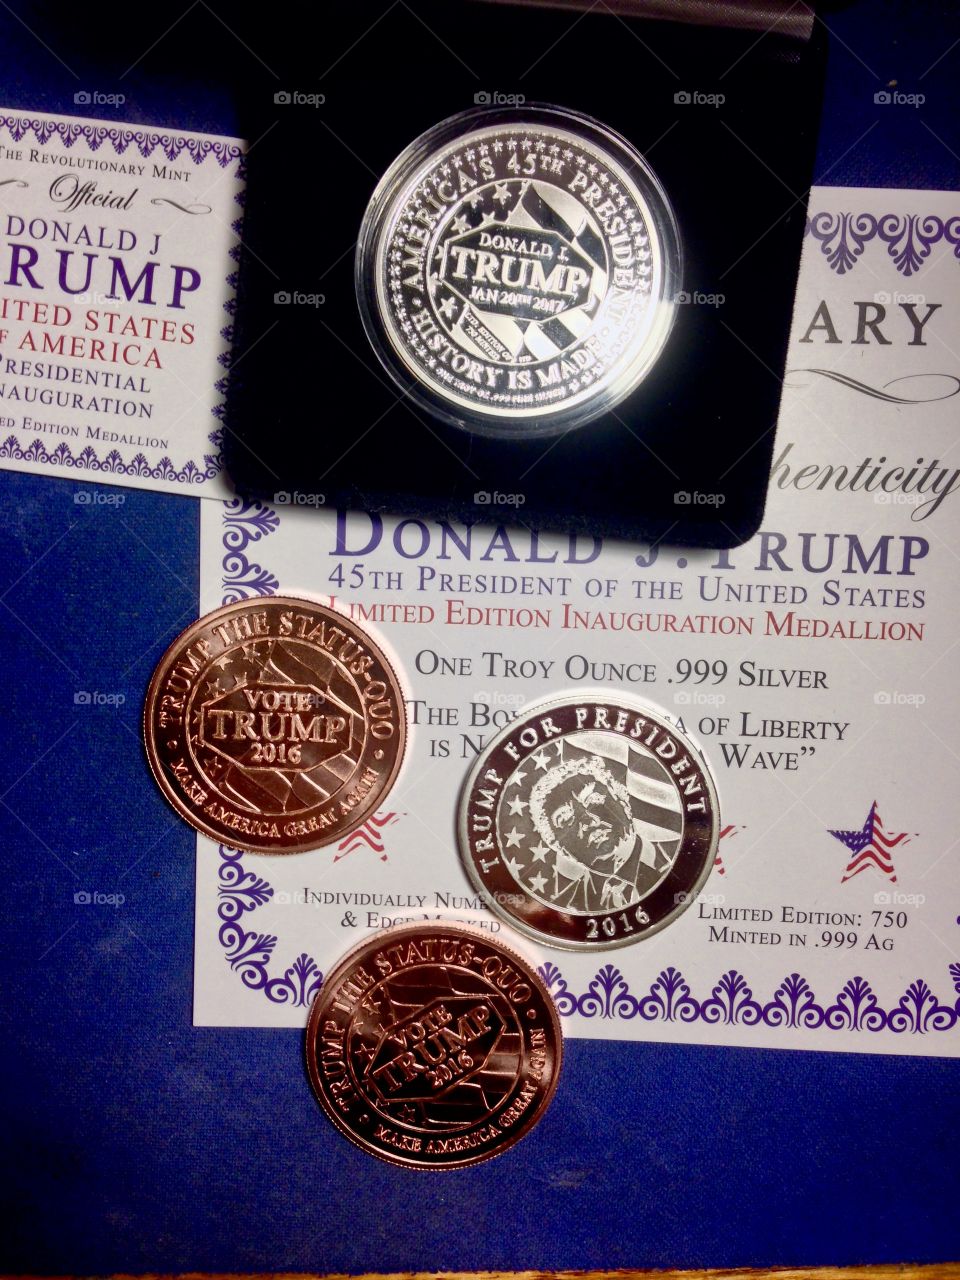 Donald Trump Collectible Coins

Published by:
HappyBrownMonkey 